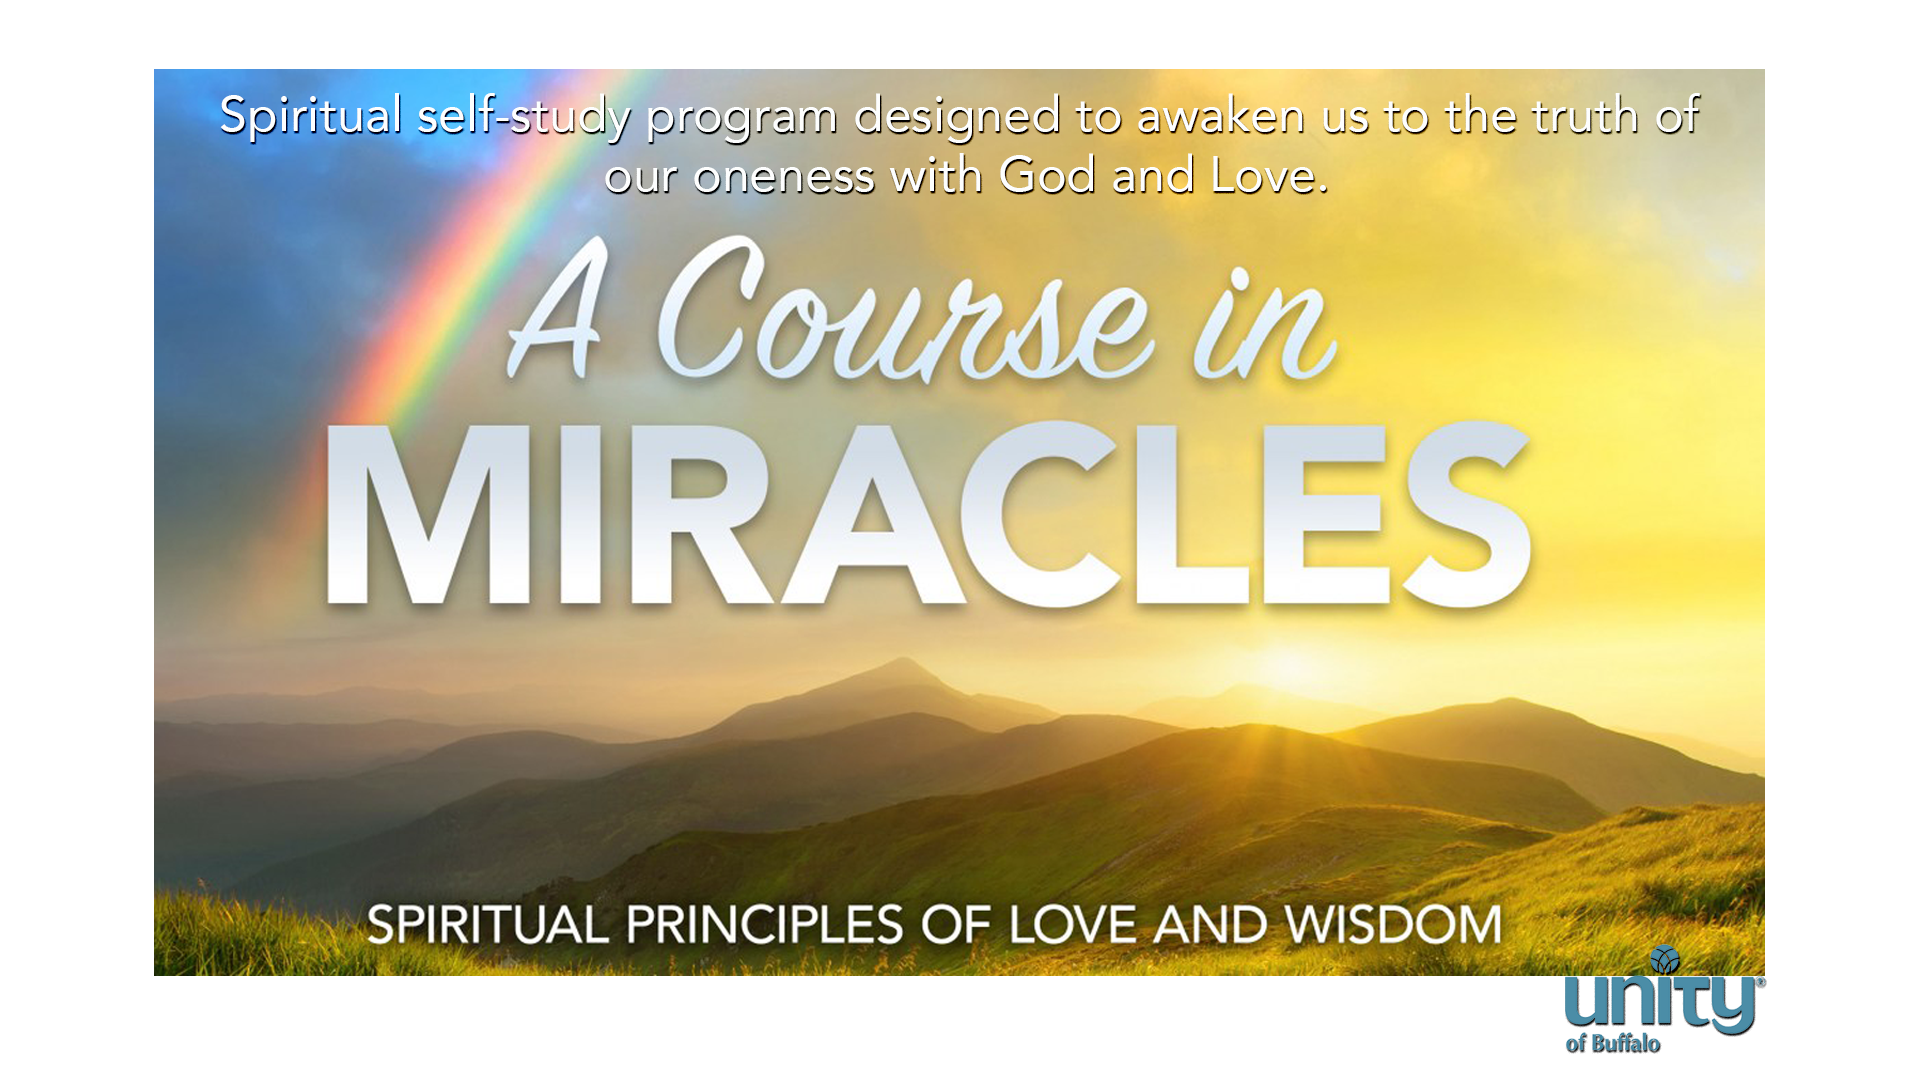 A Course in Miracles at Unity of Buffalo